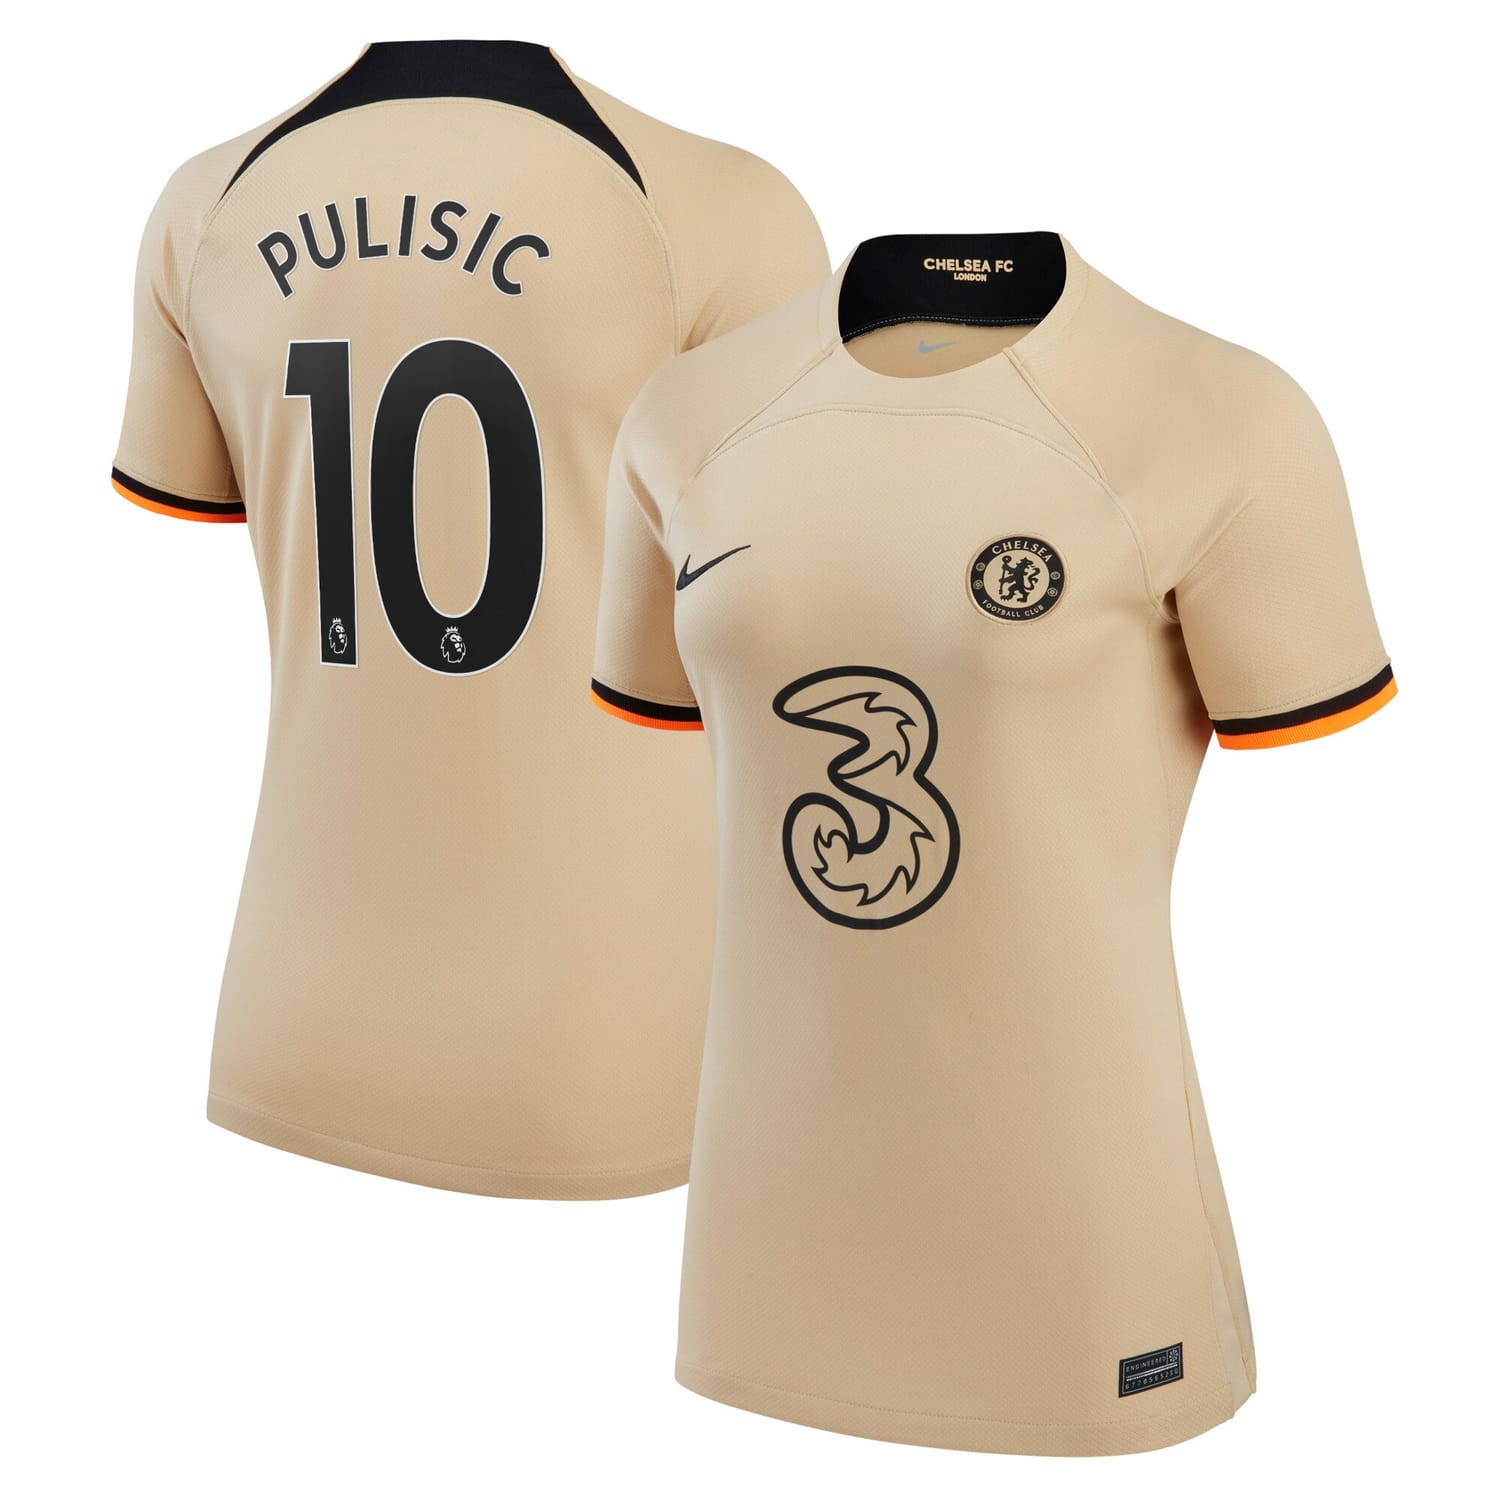 Premier League Chelsea Third Jersey Shirt Gold 2022-23 player Christian Pulisic printing for Women